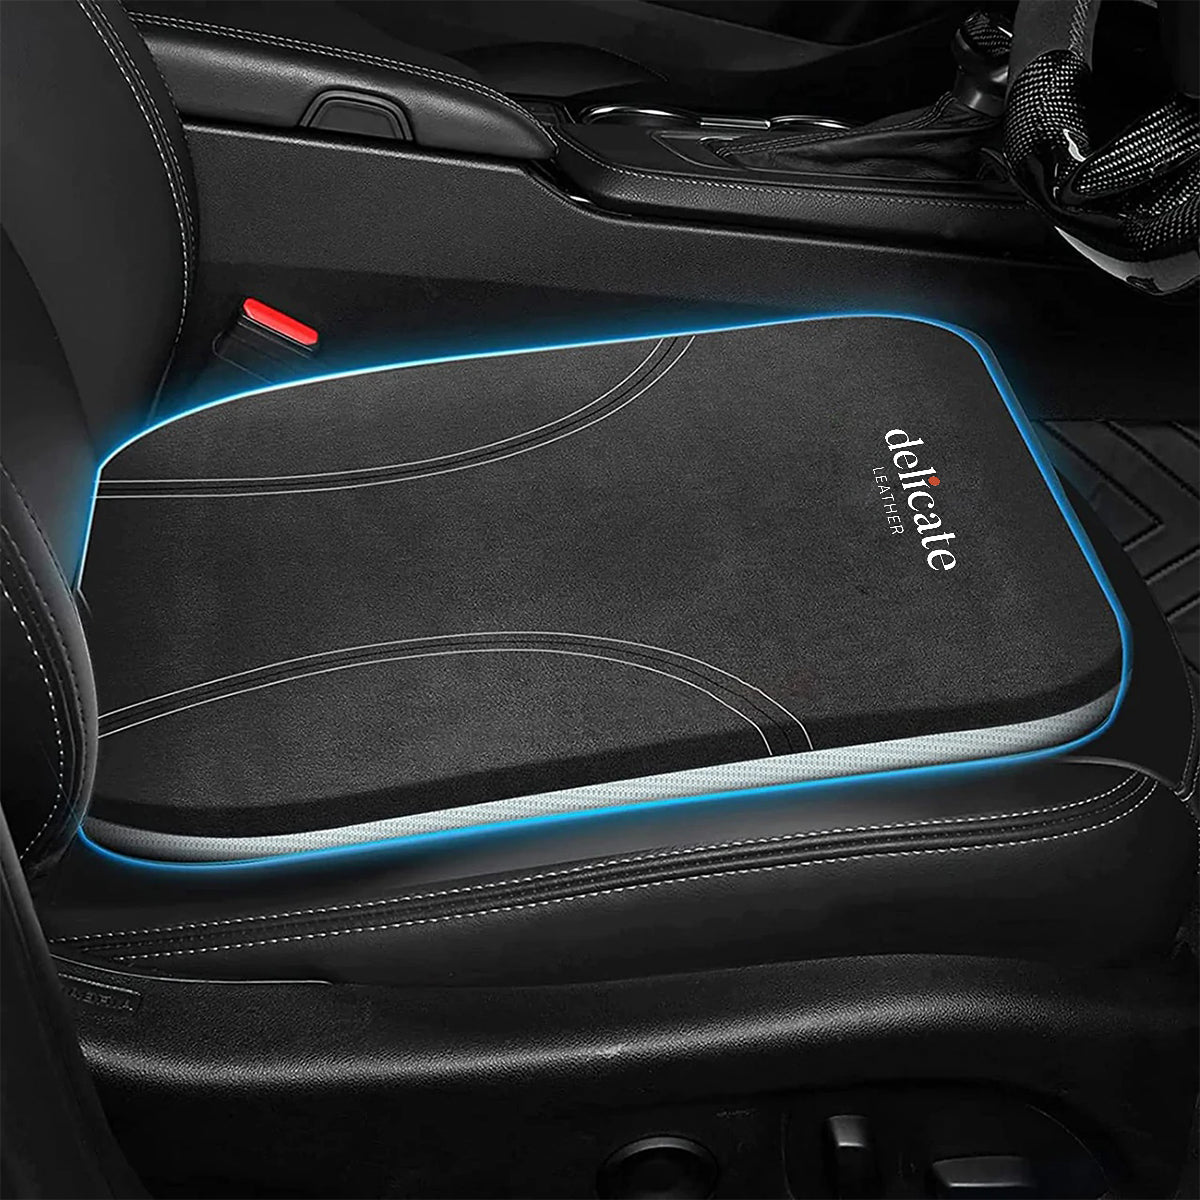 Alfa Romeo Car Seat Cushion: Enhance Comfort and Support for Your Drive